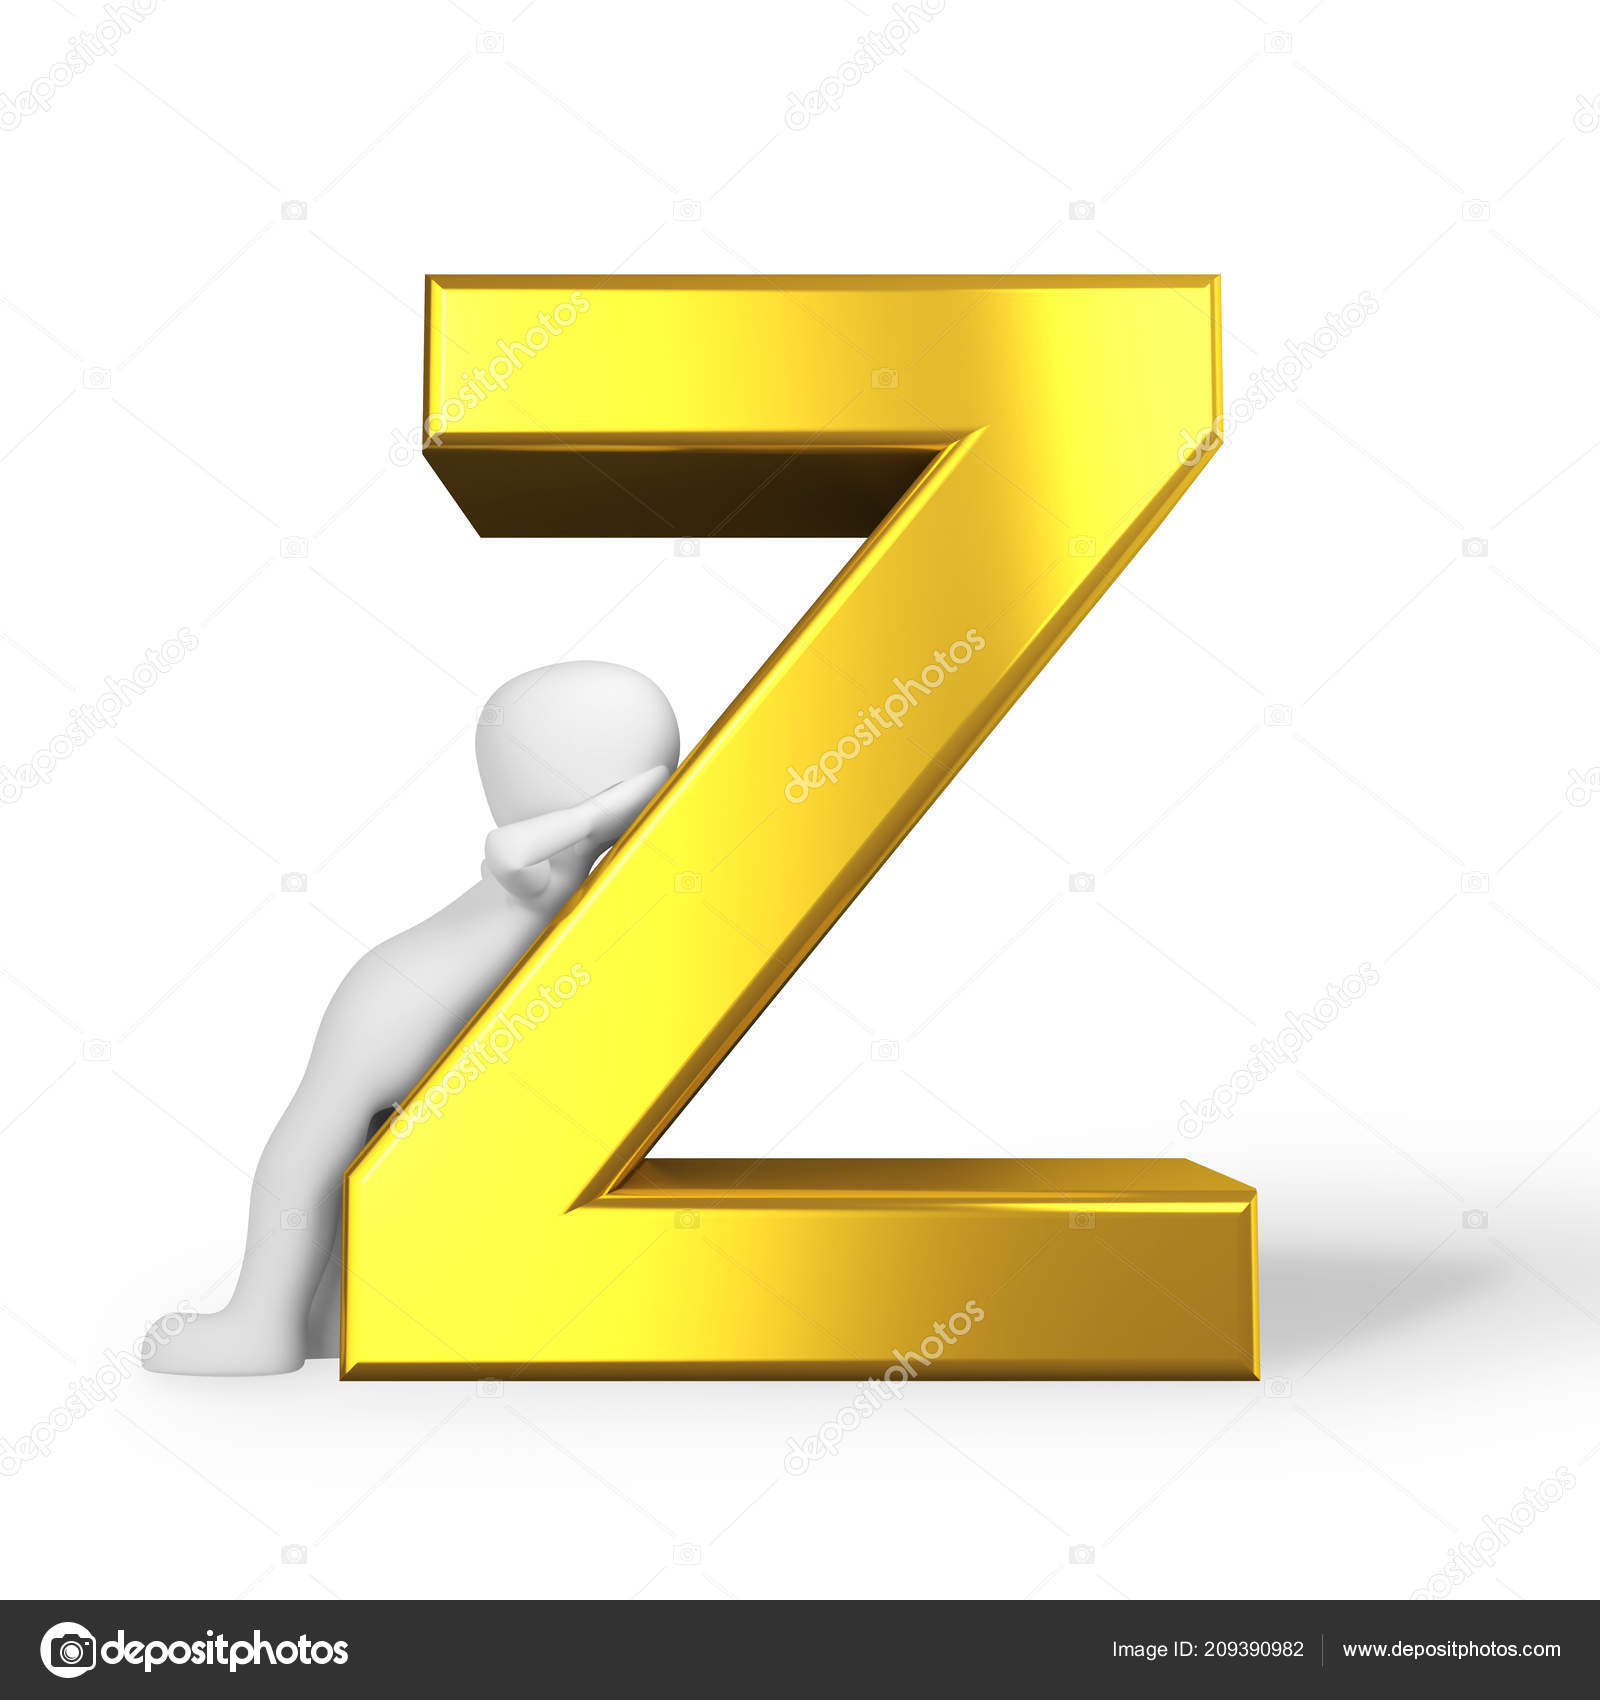 Letter Z Images Royalty Free Stock Letter Z Photos Pictures Depositphotos